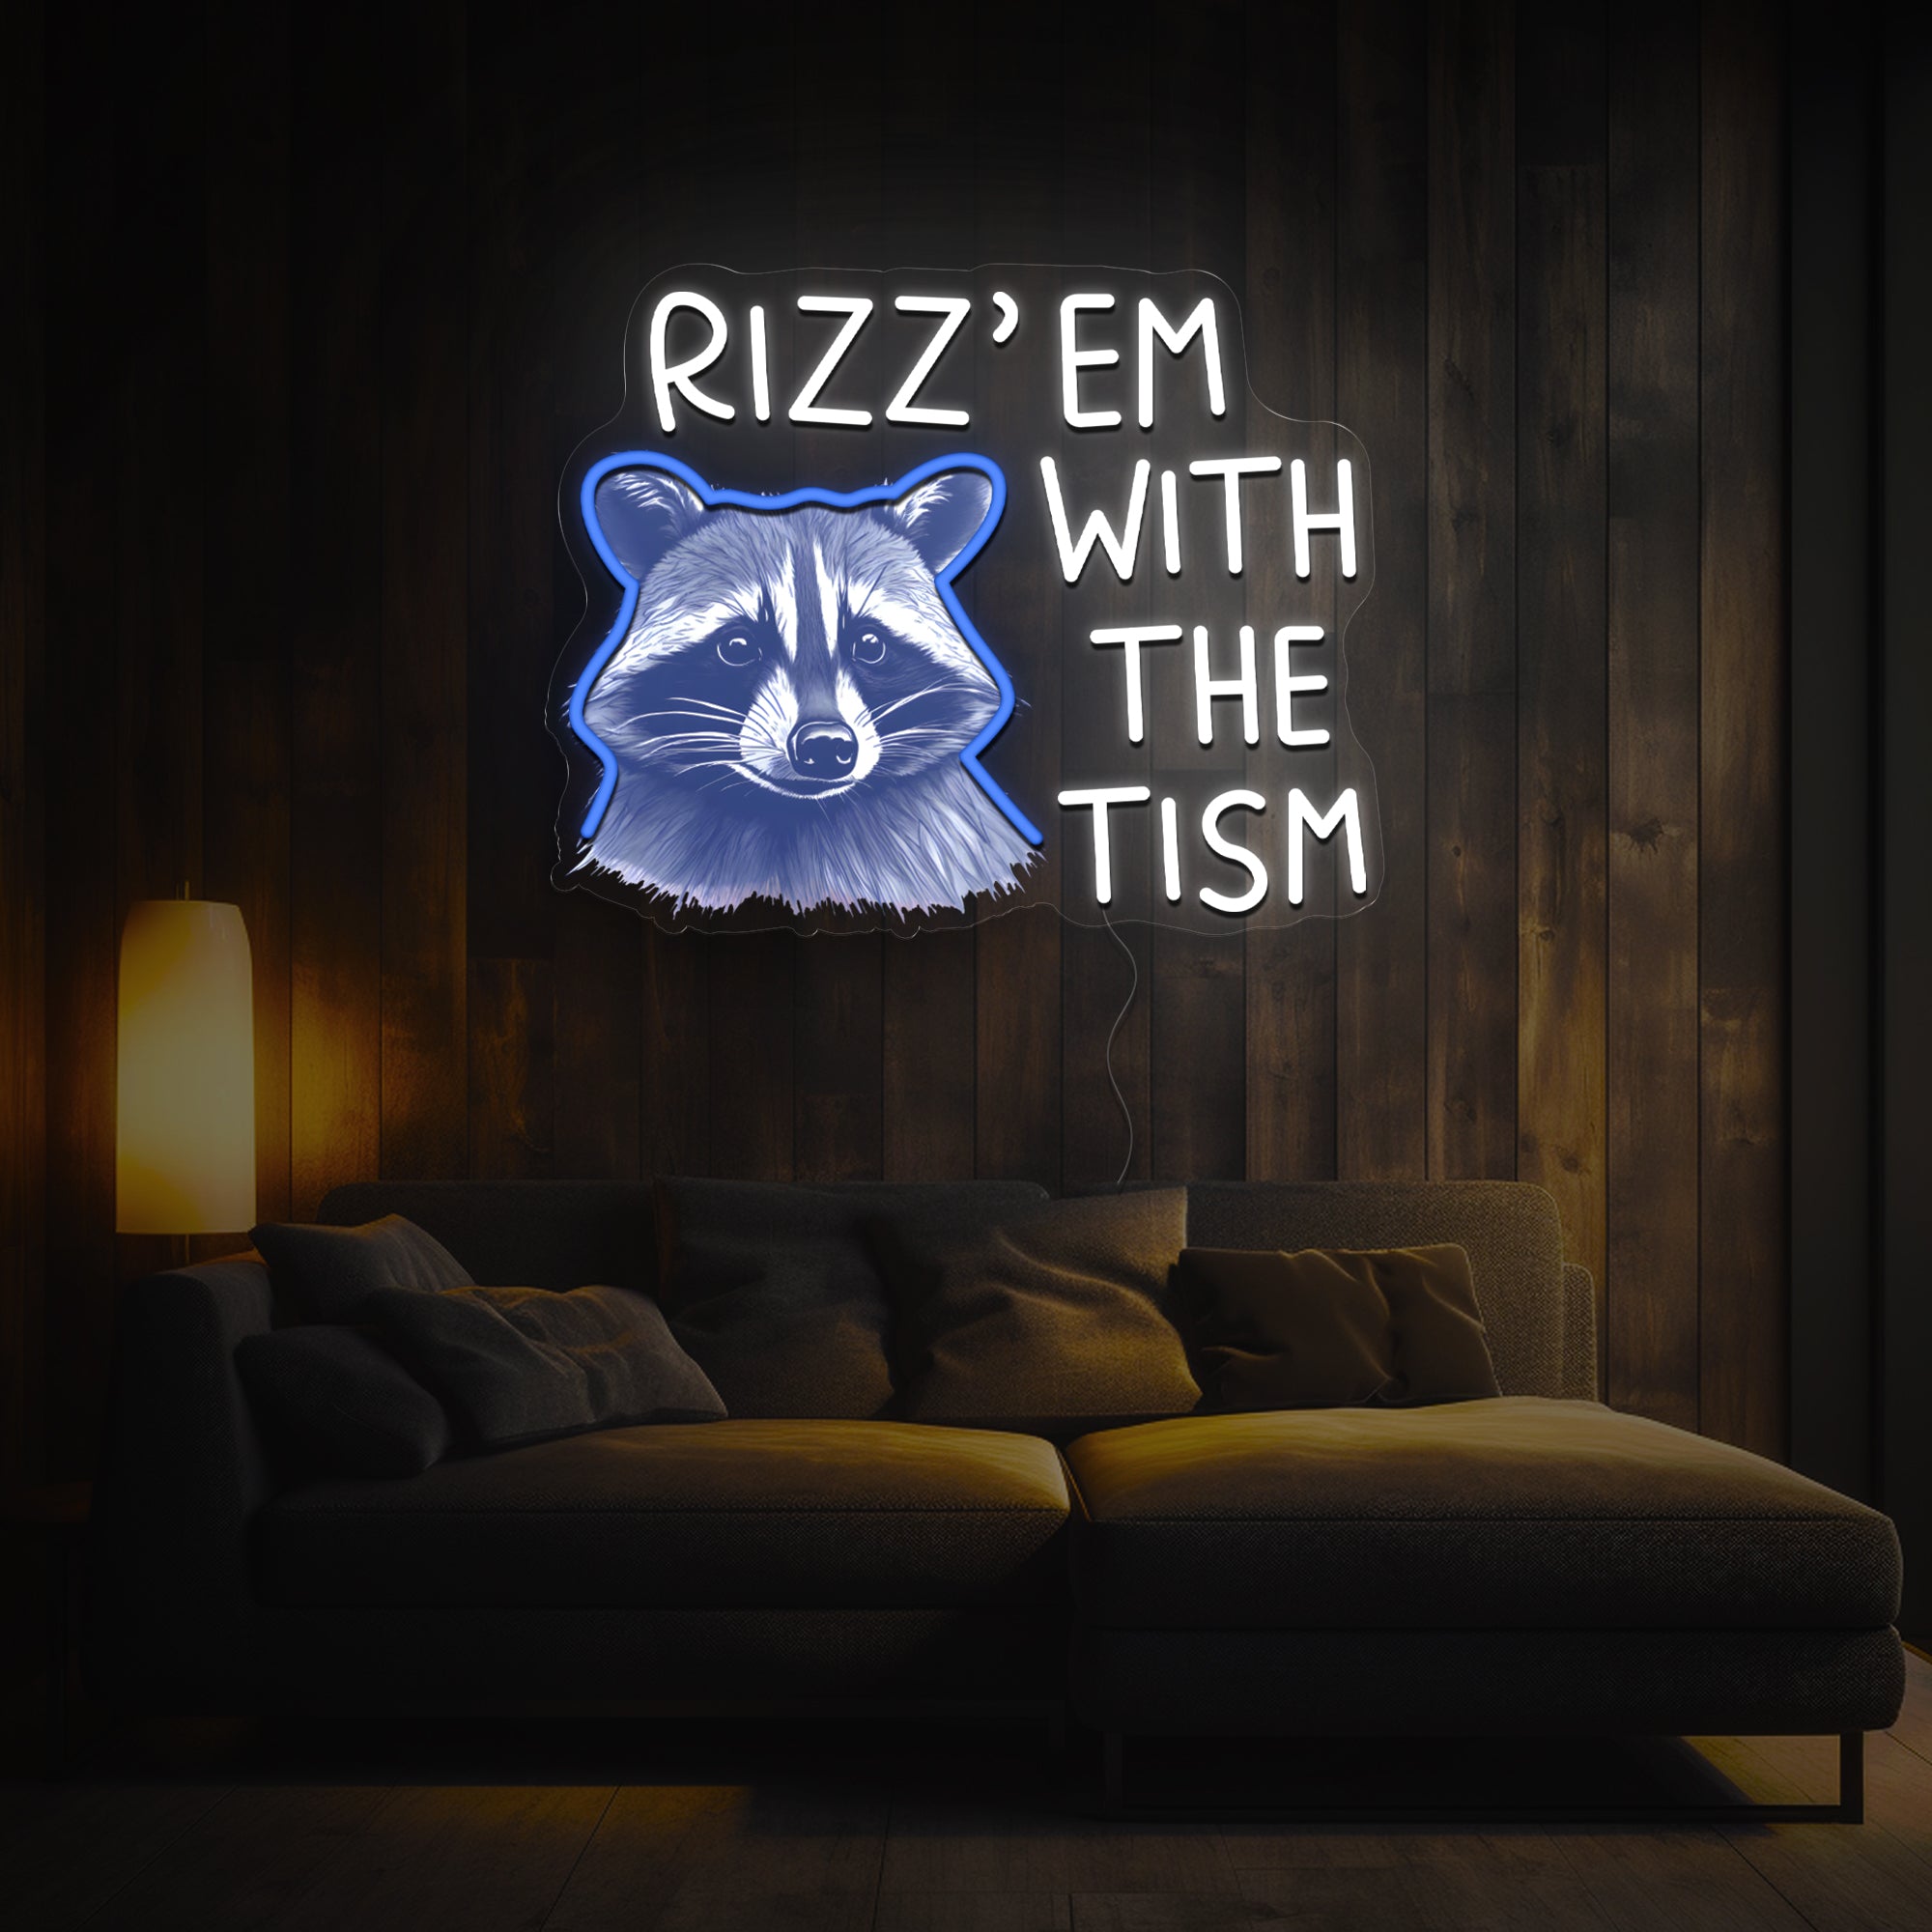 Rizz Em with The Tism Artwork Neon Sign